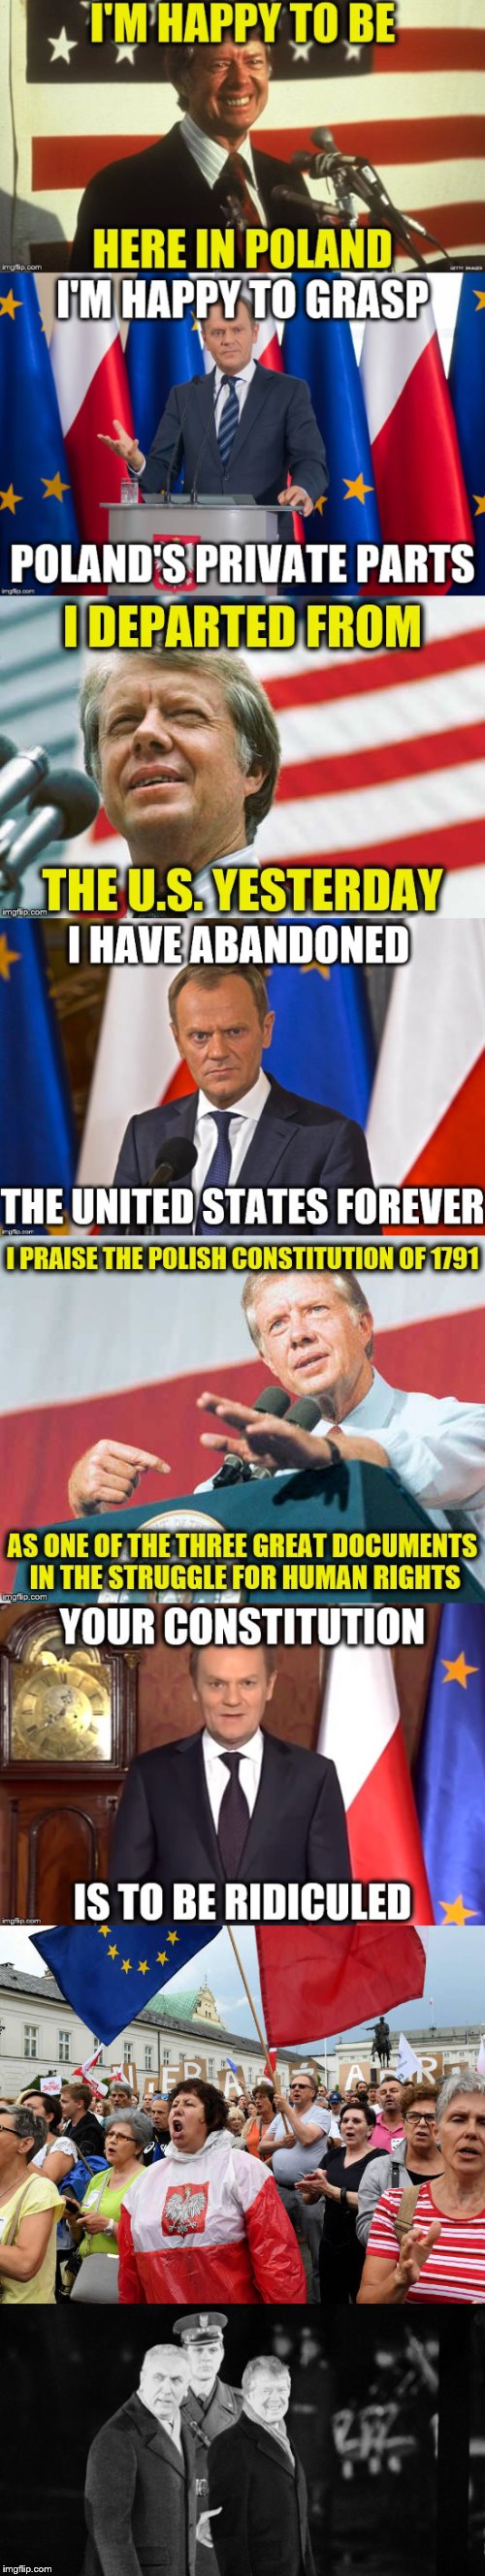 (REAL TRANSCRIPT) Of Jimmy Carter's 1977 Speech In Poland. Where A Bad Translator Led To The Most Awkward Speech In History! | image tagged in memes,funny,historical,jimmy carter,speech,translation | made w/ Imgflip meme maker